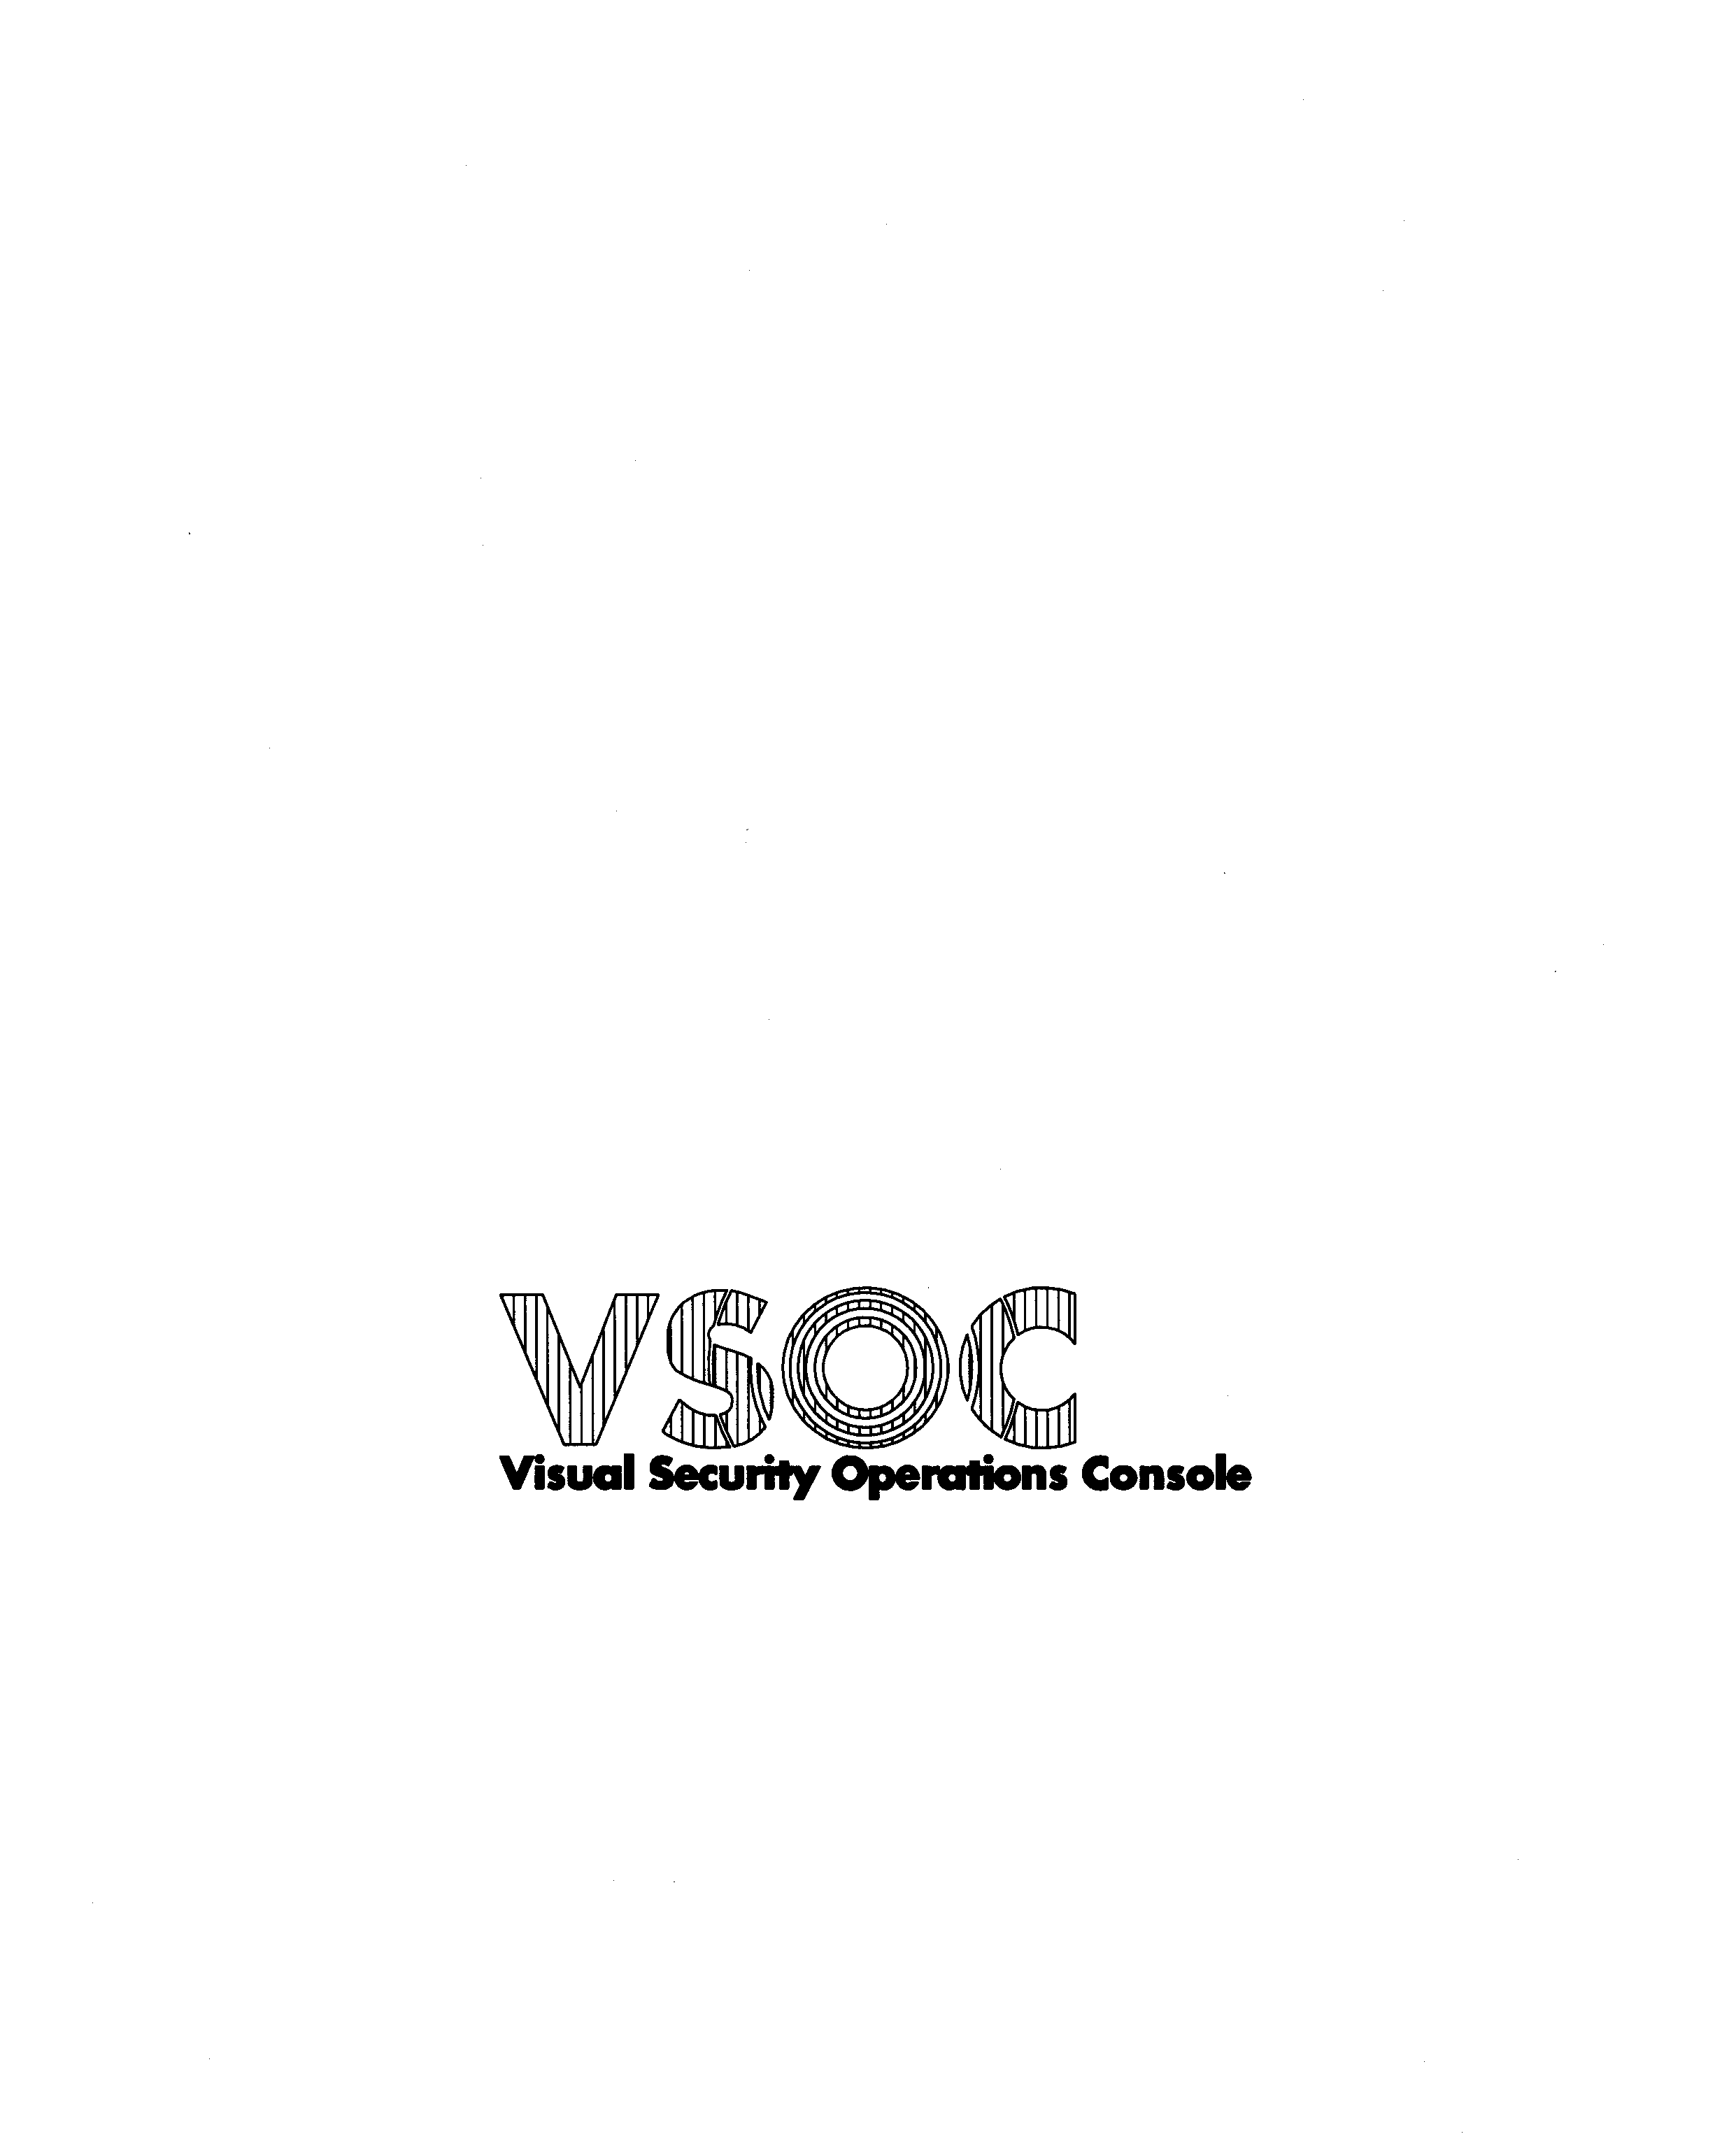  VSOC VISUAL SECURITY OPERATIONS CONSOLE